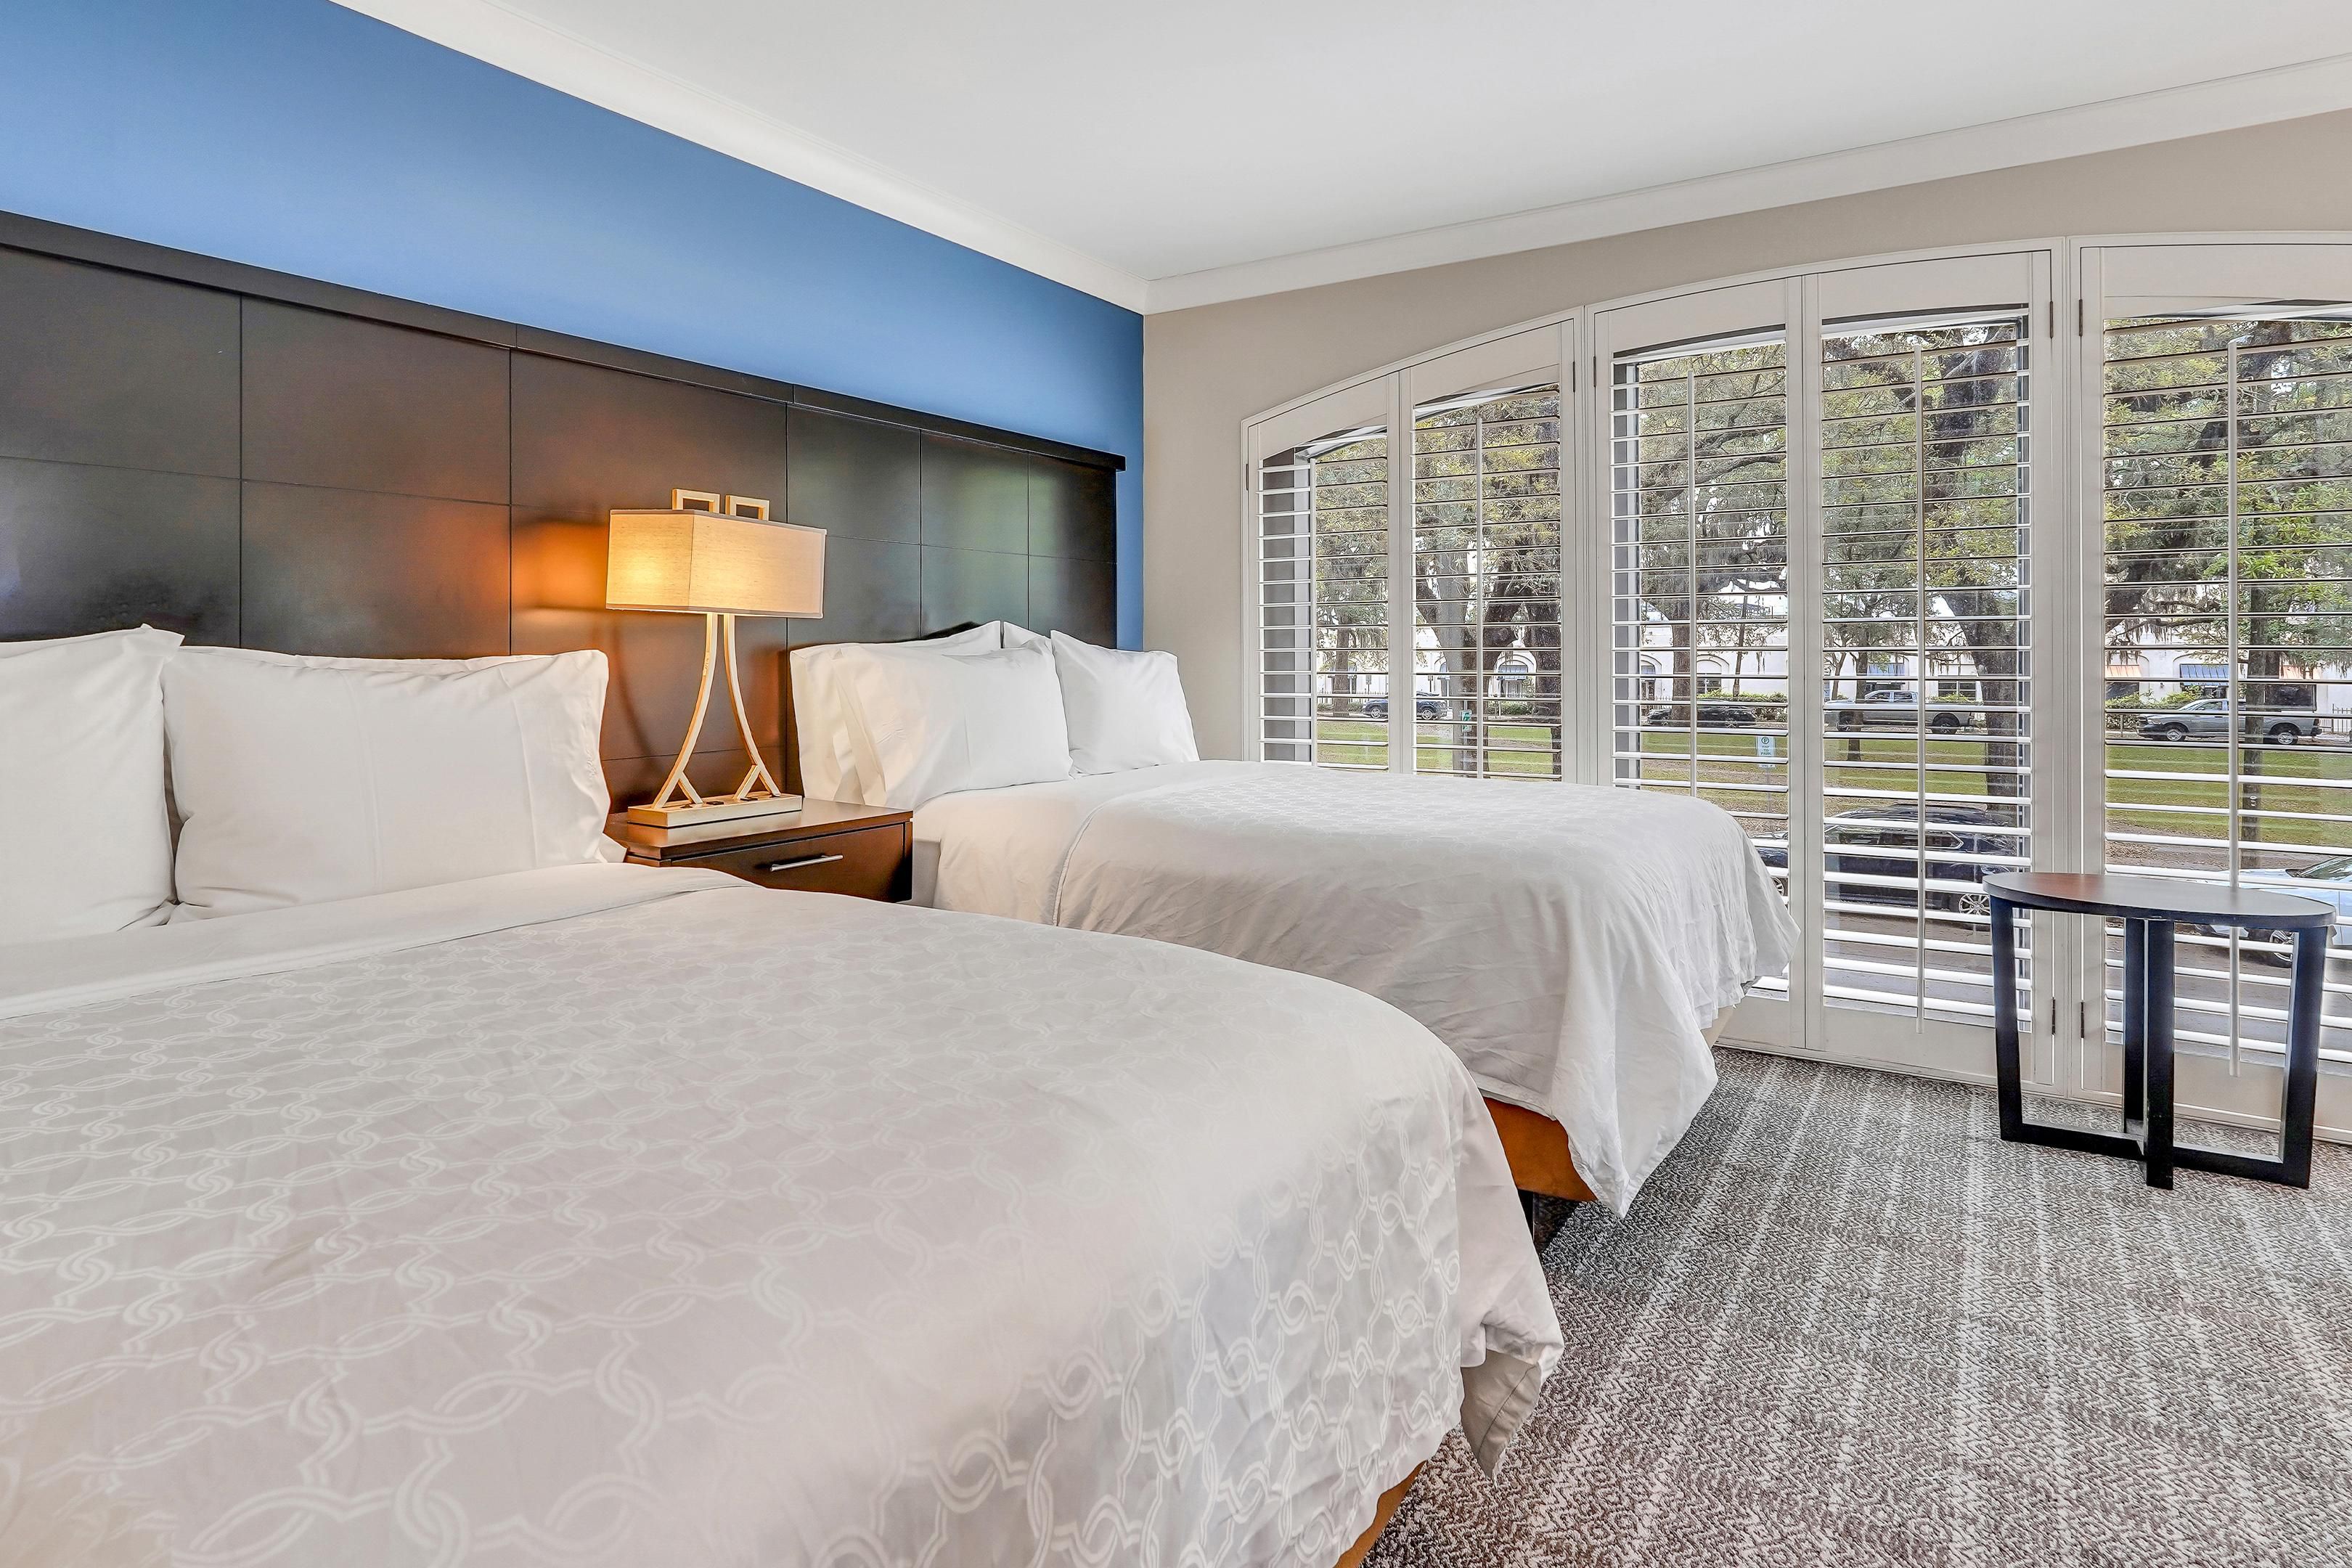 Unwind in our recently updated accommodations designed with you in mind.